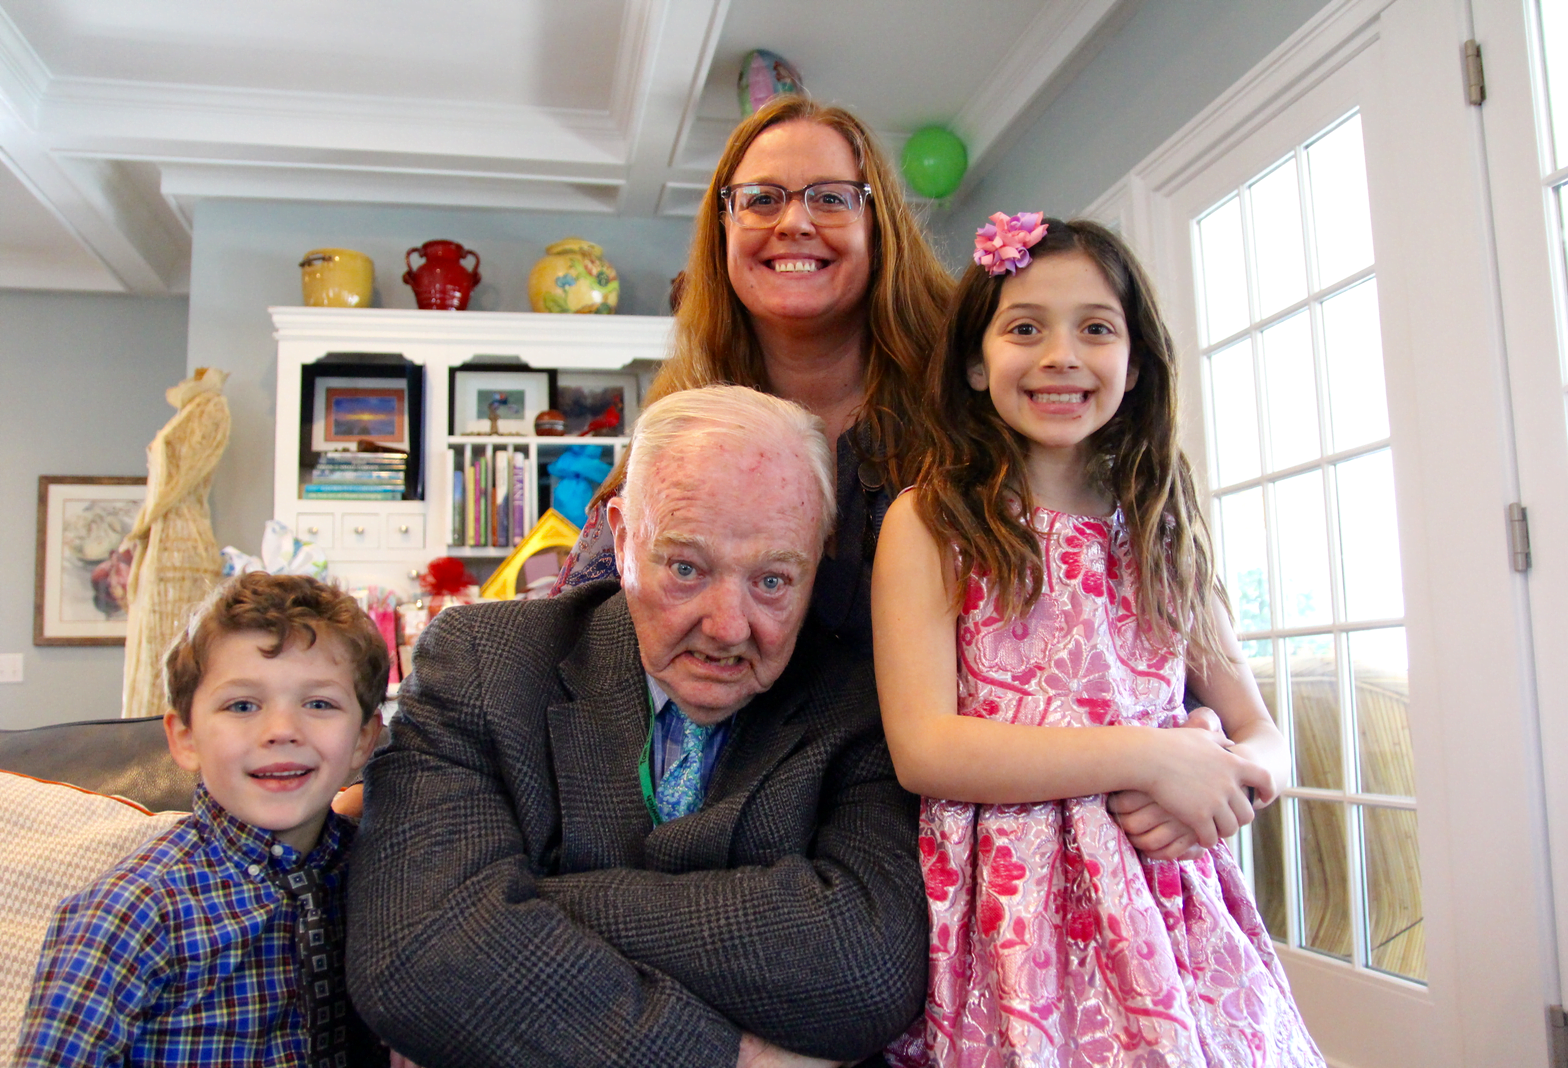 Gus Reynolds, John Munnelly, Rebecca Lindemeyer and Piper Reynolds at Marion Pastore's 100th birthday party in Riverside, March 11, 2018 Photo Leslie Yager